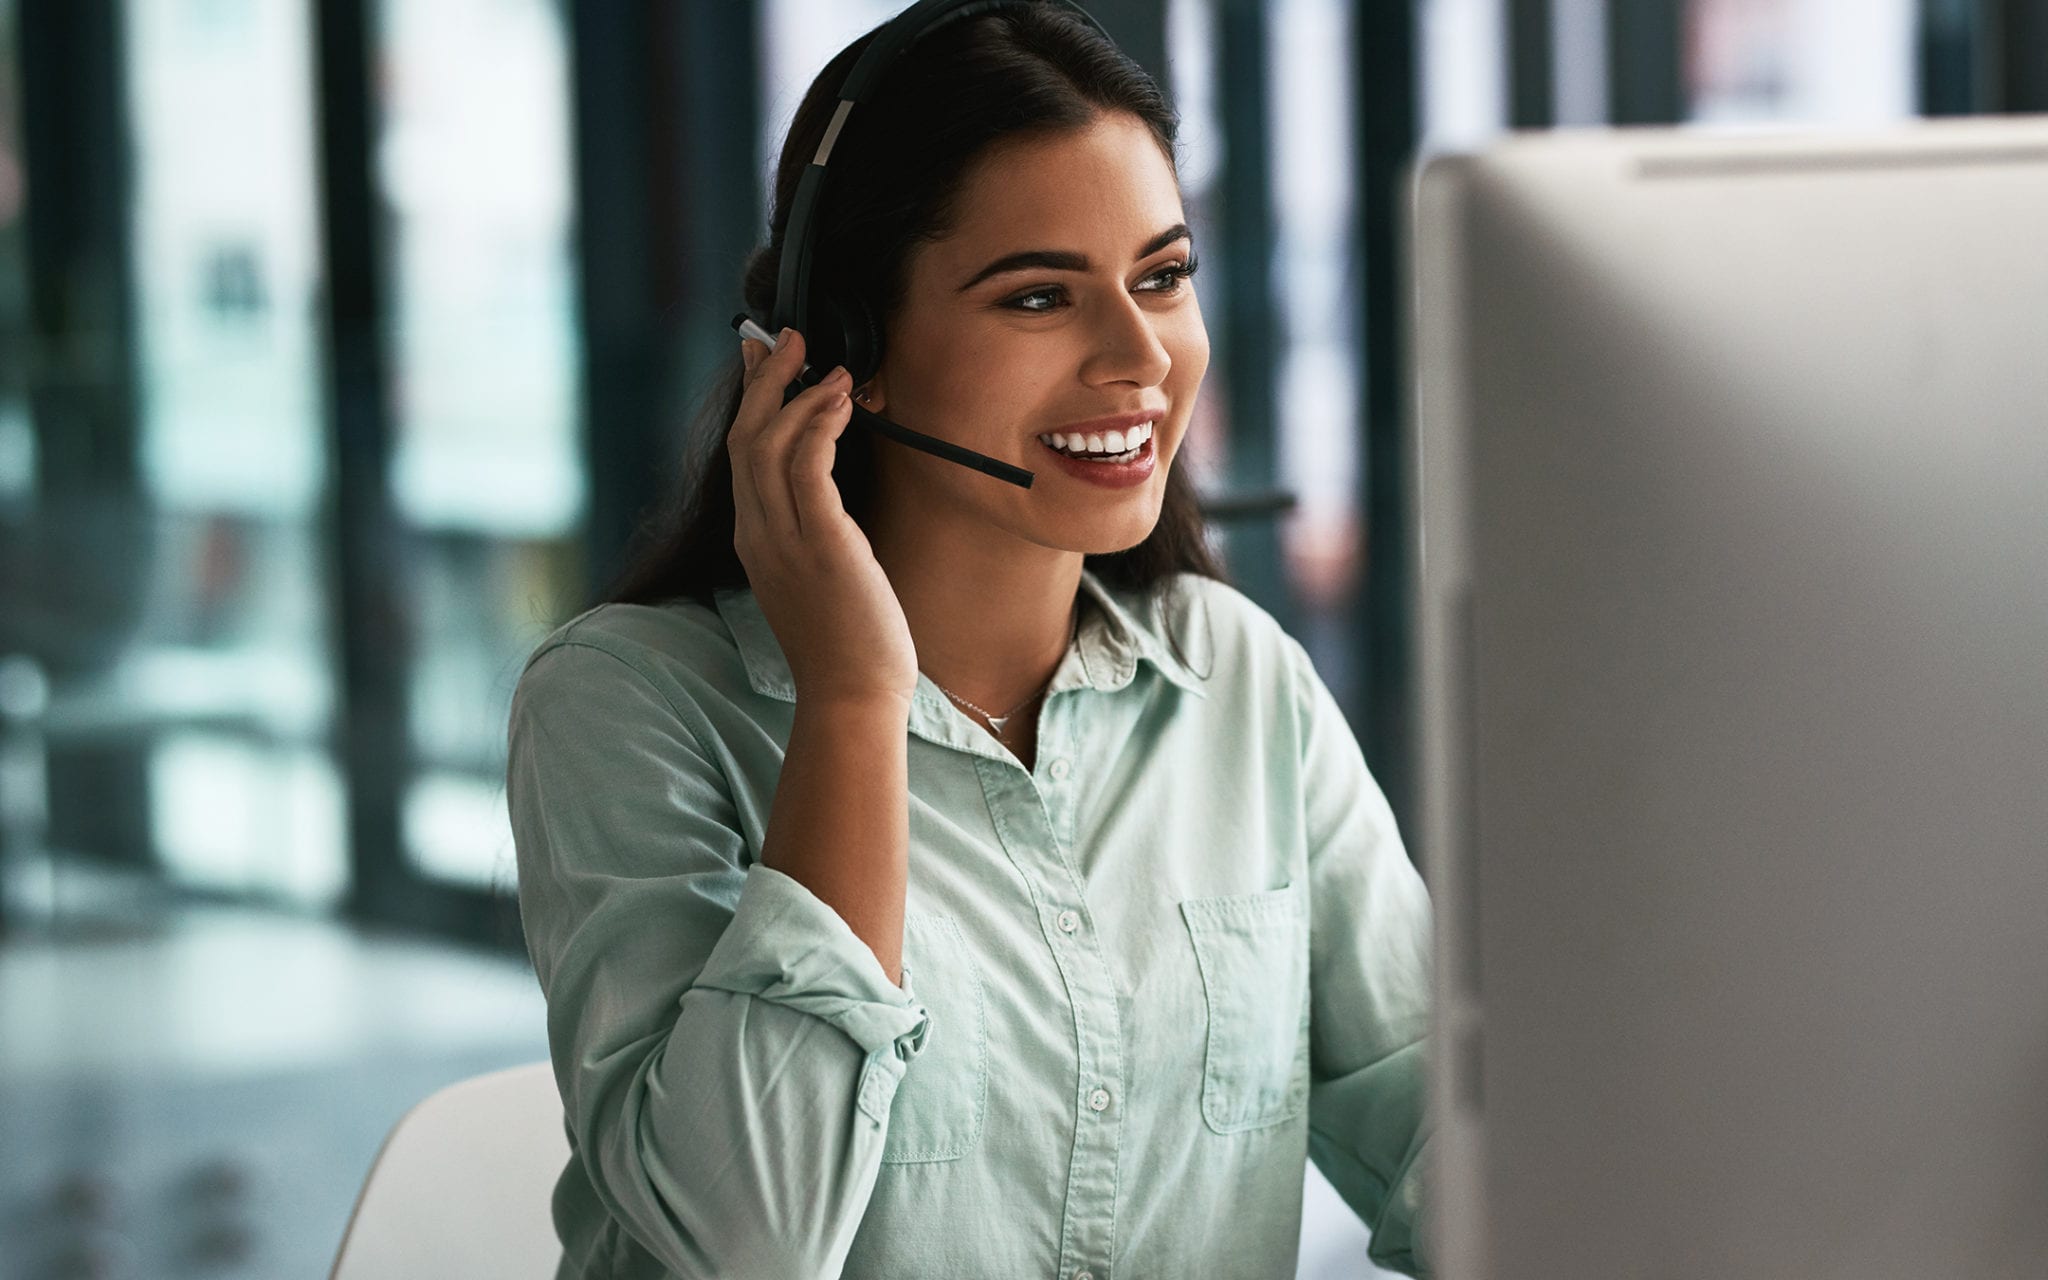 Employee at healthcare call center using Intelligent Engagement methods